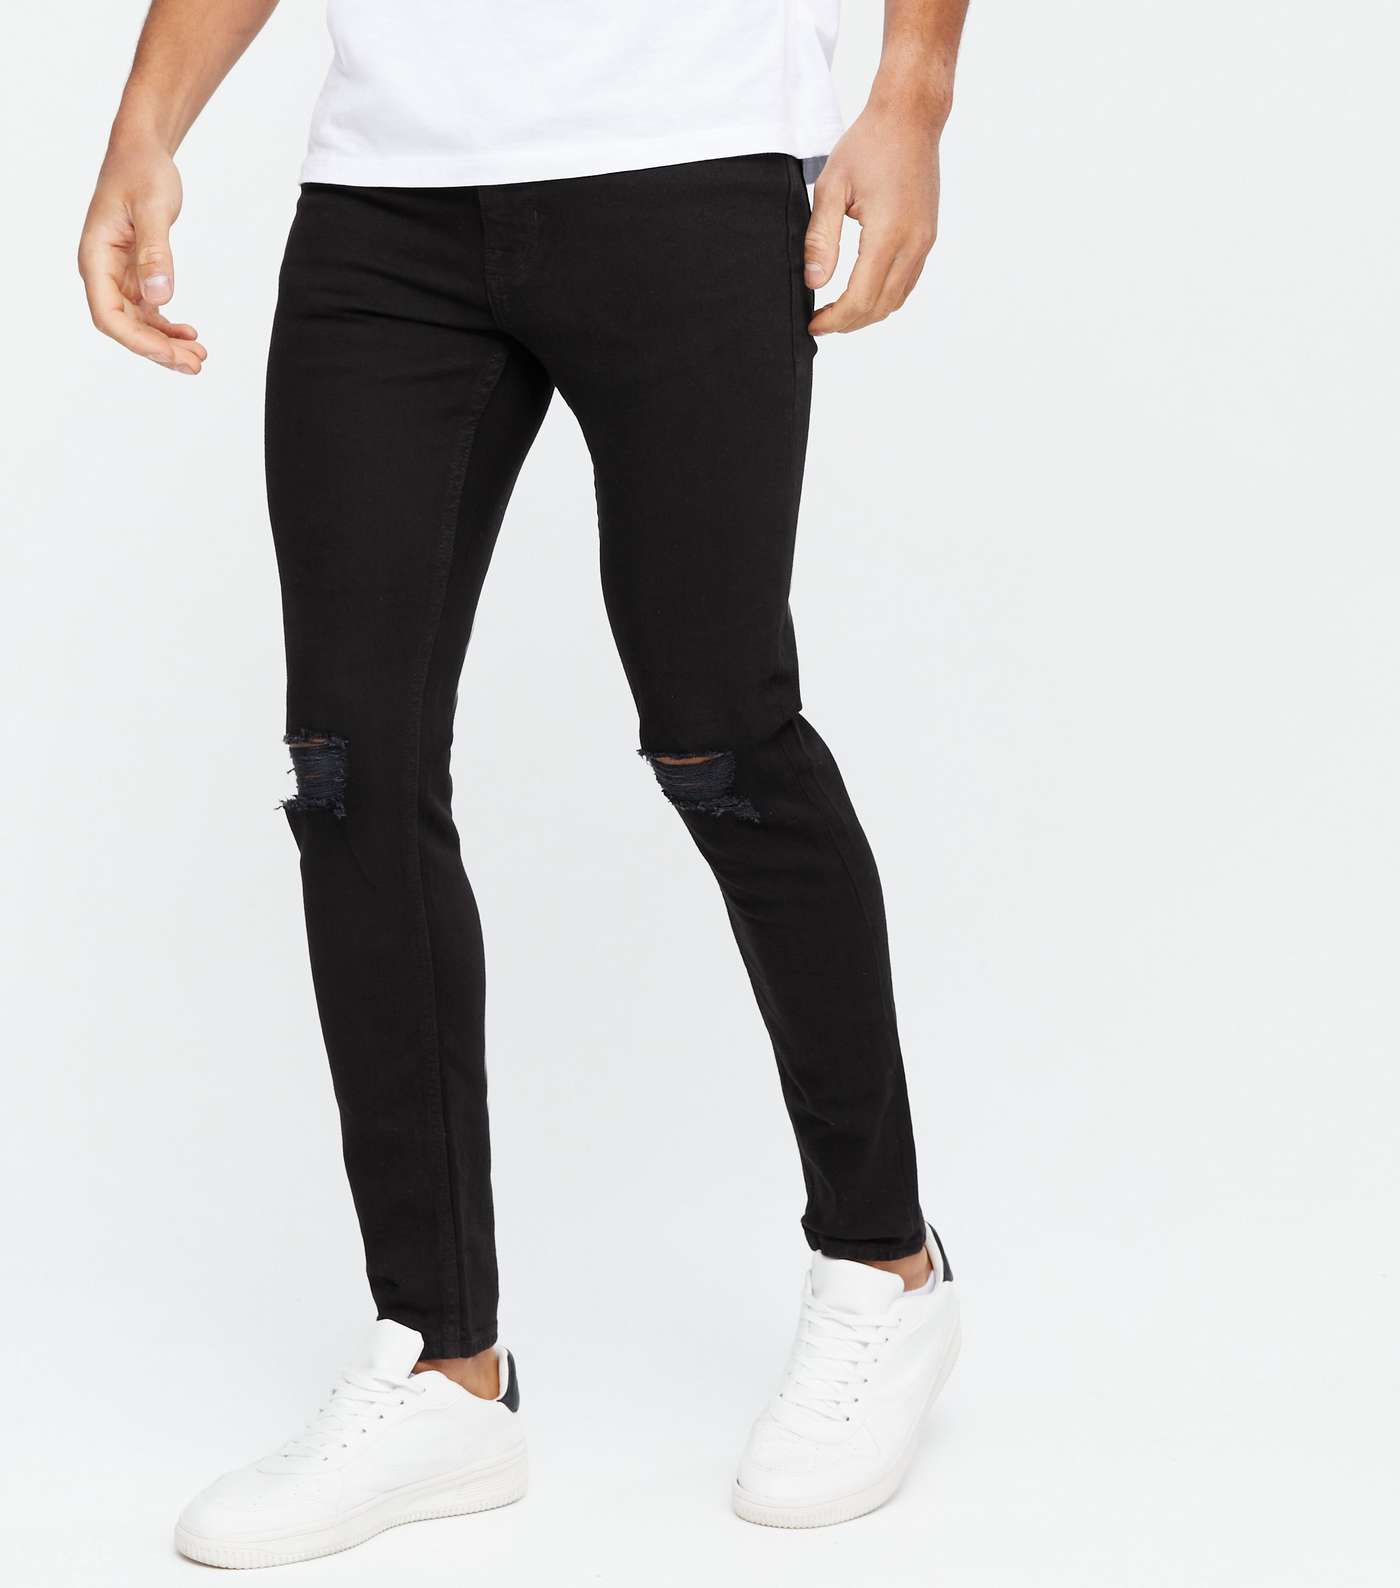 Black Ripped Knee Skinny Stretch Jeans Image 2